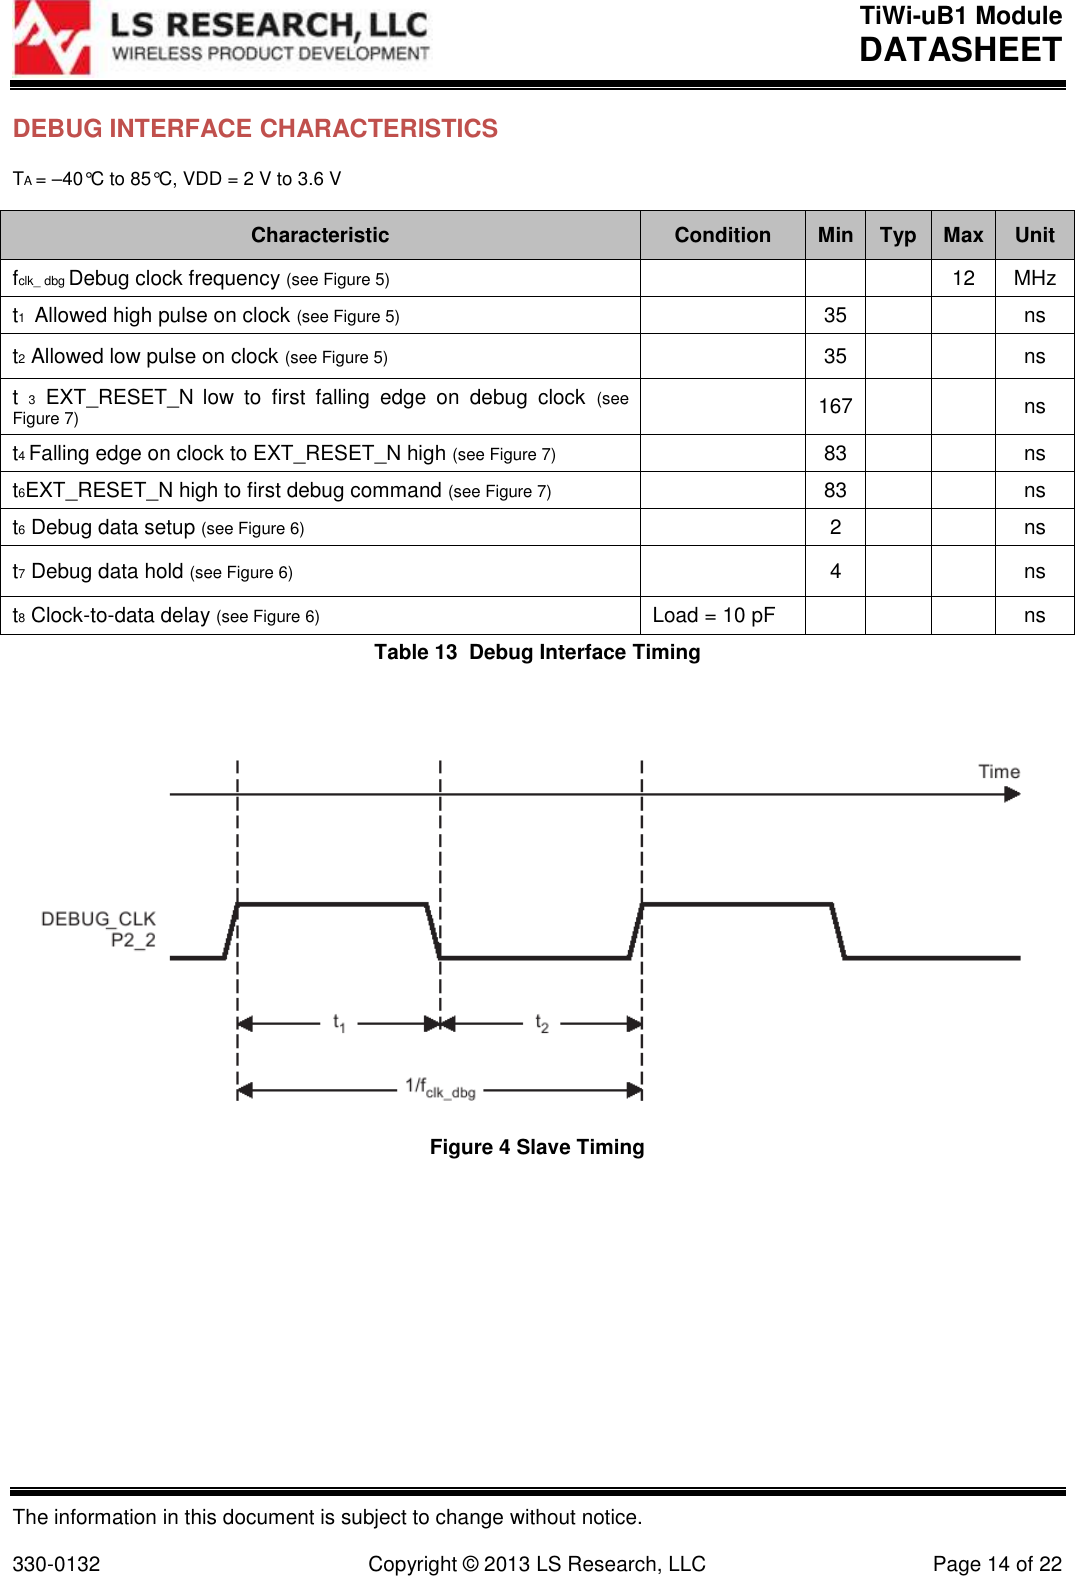 TiWi-uB1 Module DATASHEET  The information in this document is subject to change without notice.  330-0132  Copyright © 2013 LS Research, LLC  Page 14 of 22 DEBUG INTERFACE CHARACTERISTICS  TA = –40°C to 85°C, VDD = 2 V to 3.6 V Characteristic Condition Min Typ Max Unit fclk_ dbg Debug clock frequency (see Figure 5)    12 MHz t1  Allowed high pulse on clock (see Figure 5)  35   ns t2 Allowed low pulse on clock (see Figure 5)  35   ns t  3  EXT_RESET_N low  to  first  falling  edge  on  debug  clock  (see  Figure 7)  167   ns t4 Falling edge on clock to EXT_RESET_N high (see Figure 7)  83   ns t6EXT_RESET_N high to first debug command (see Figure 7)  83   ns t6 Debug data setup (see Figure 6)  2   ns t7 Debug data hold (see Figure 6)  4   ns t8 Clock-to-data delay (see Figure 6) Load = 10 pF    ns Table 13  Debug Interface Timing   Figure 4 Slave Timing  